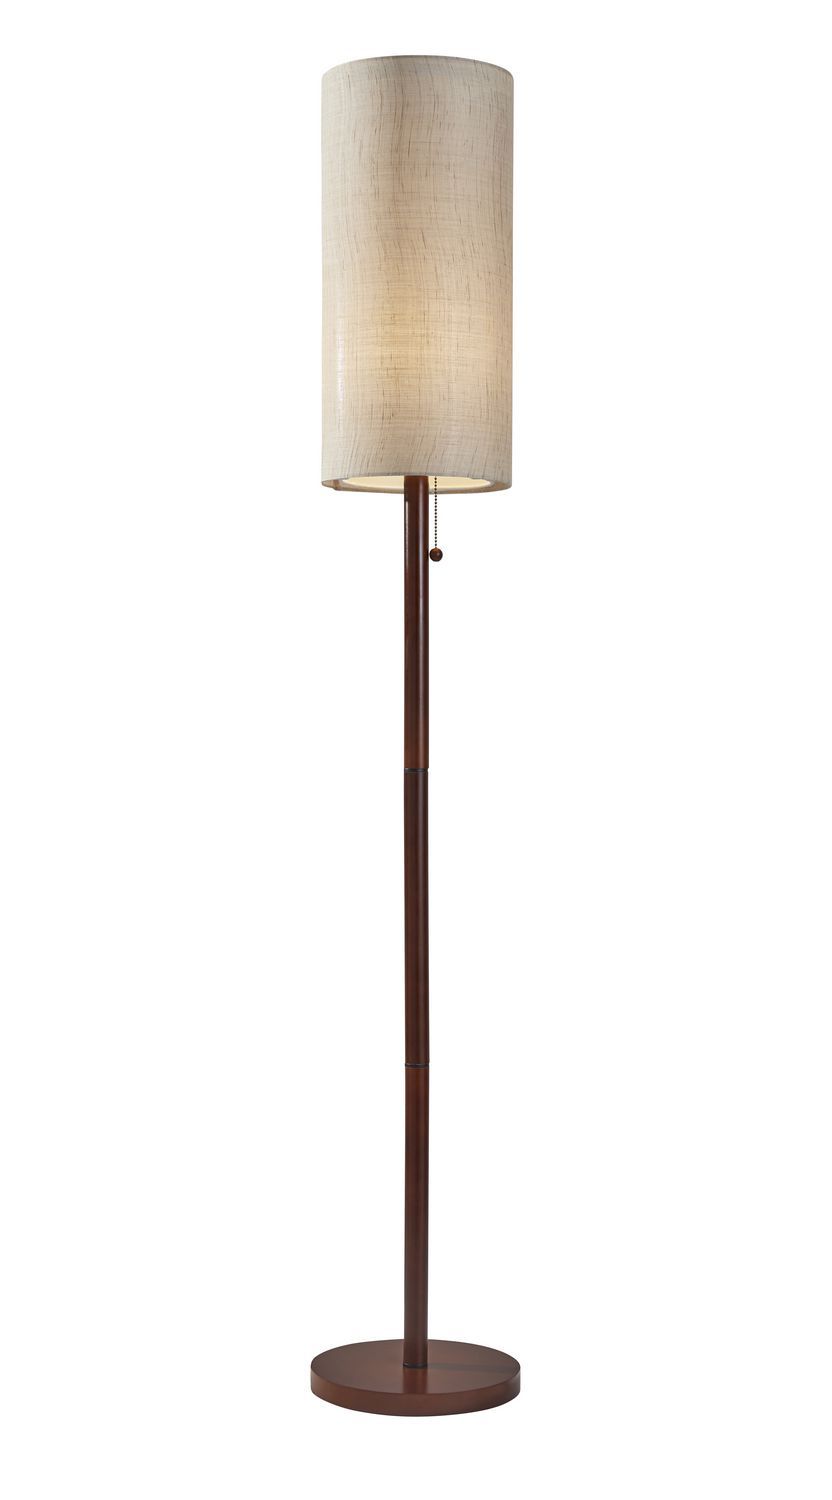 Transitional Floor Lamp In Walnut Wood From The Hamptons Collection Adesso Home 3338 15 | Narrow Floor Lamp, Floor Lamp, Wood Floor Lamp Throughout Walnut Floor Lamps (View 14 of 20)